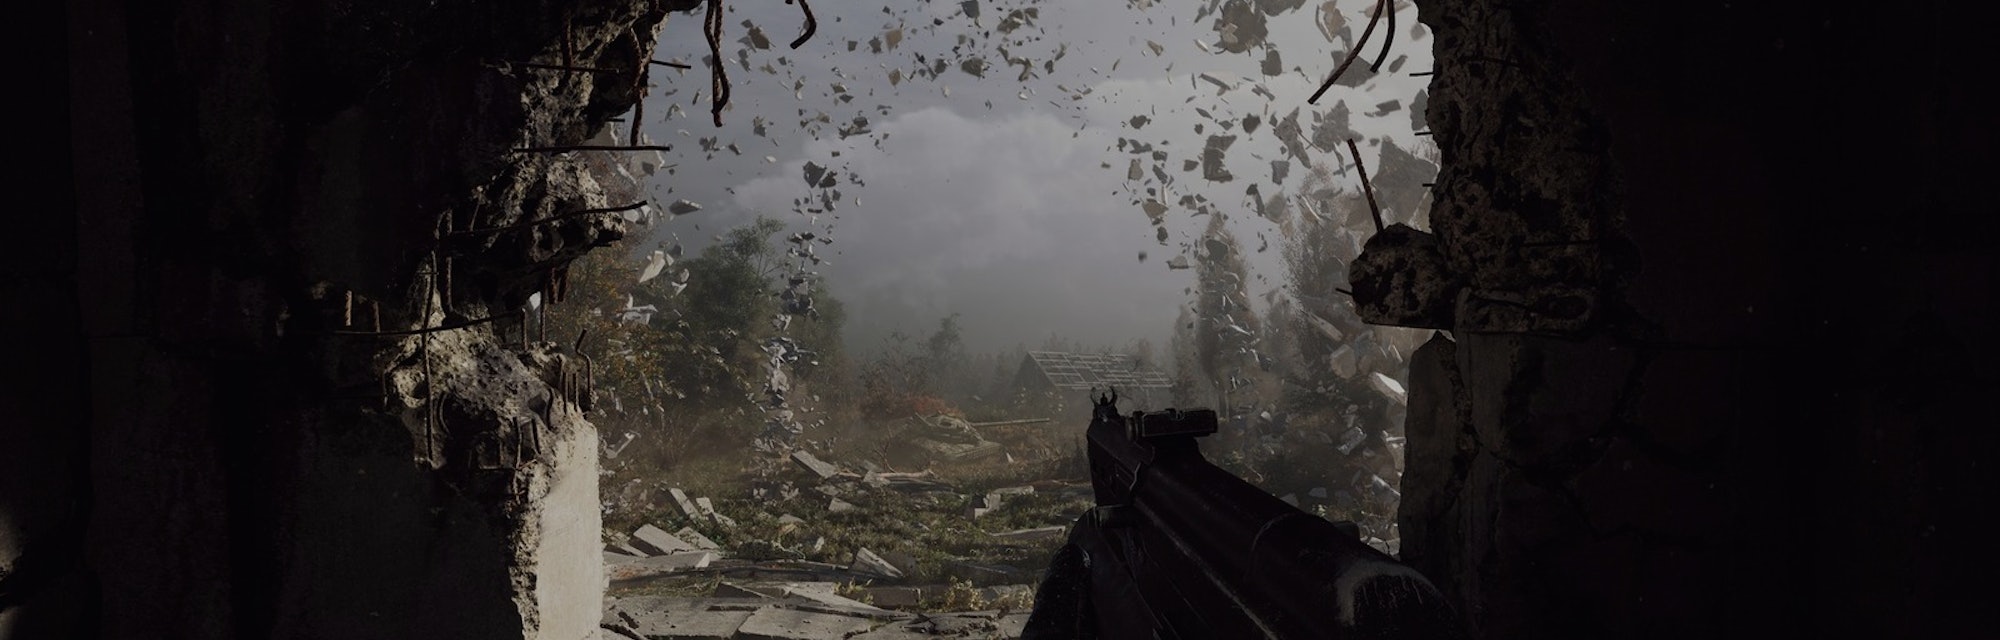 first-person view holding a gun with rocks flying and gritty farm landscape